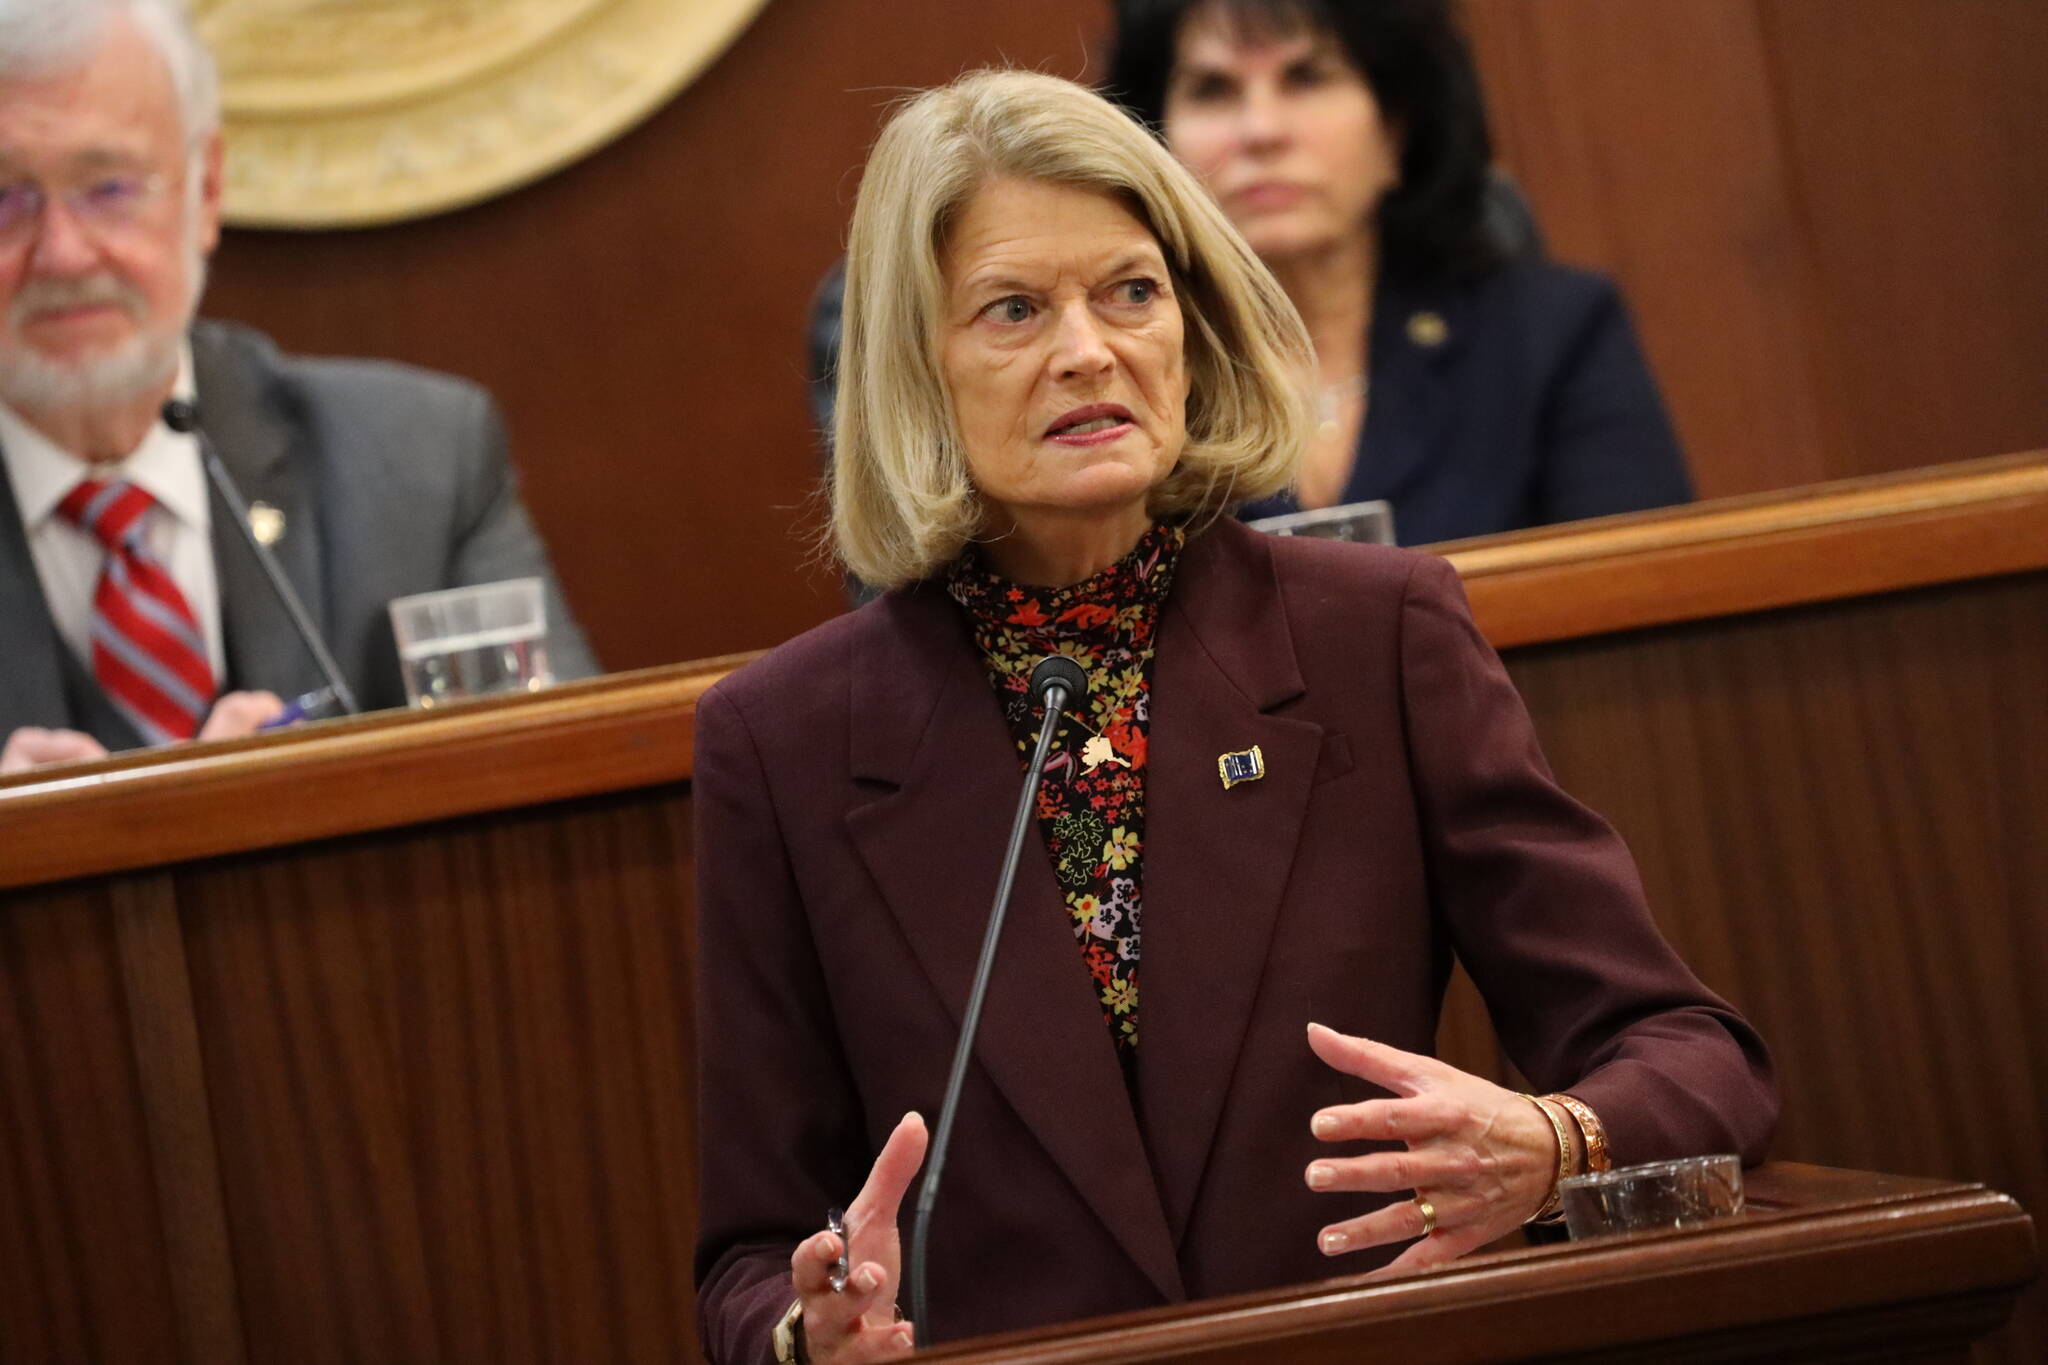 Clarise Larson / Juneau Empire 
U.S. Sen. Lisa Murkowski challenges the Alaska State Legislature to “right the ship” by taking necessary action to secure federal funds for ferries, infrastructure and other needs during her annual speech Wednesday at the Alaska State Capitol.